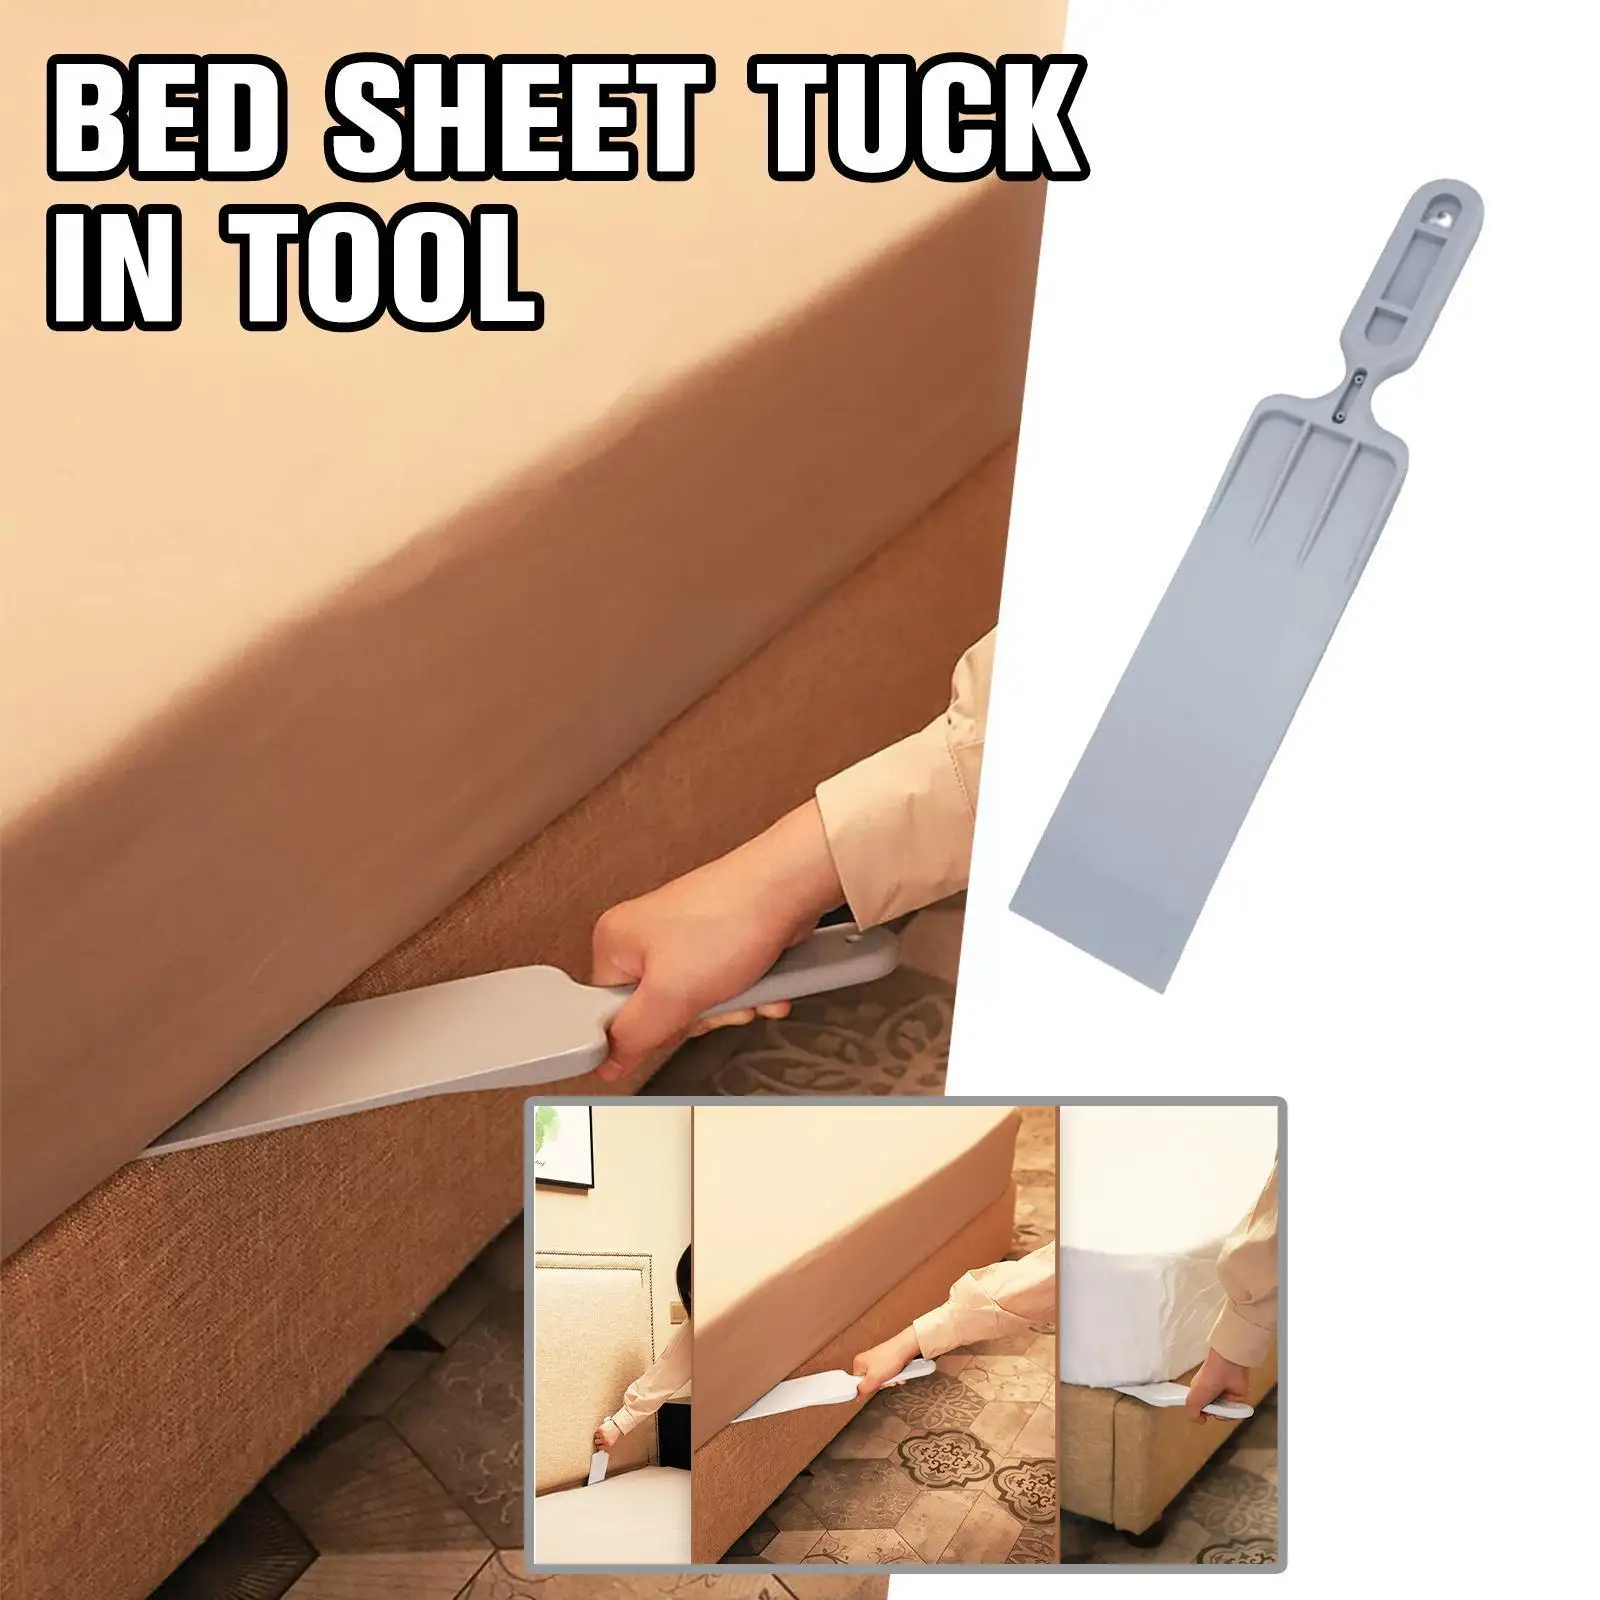 Bed Mattress Lifter Tucking Paddle For Bed Sheet Tuck In Tool Bed Sheet Paddle Without Mattress Lifting Bedsheet Change Hel R4s9